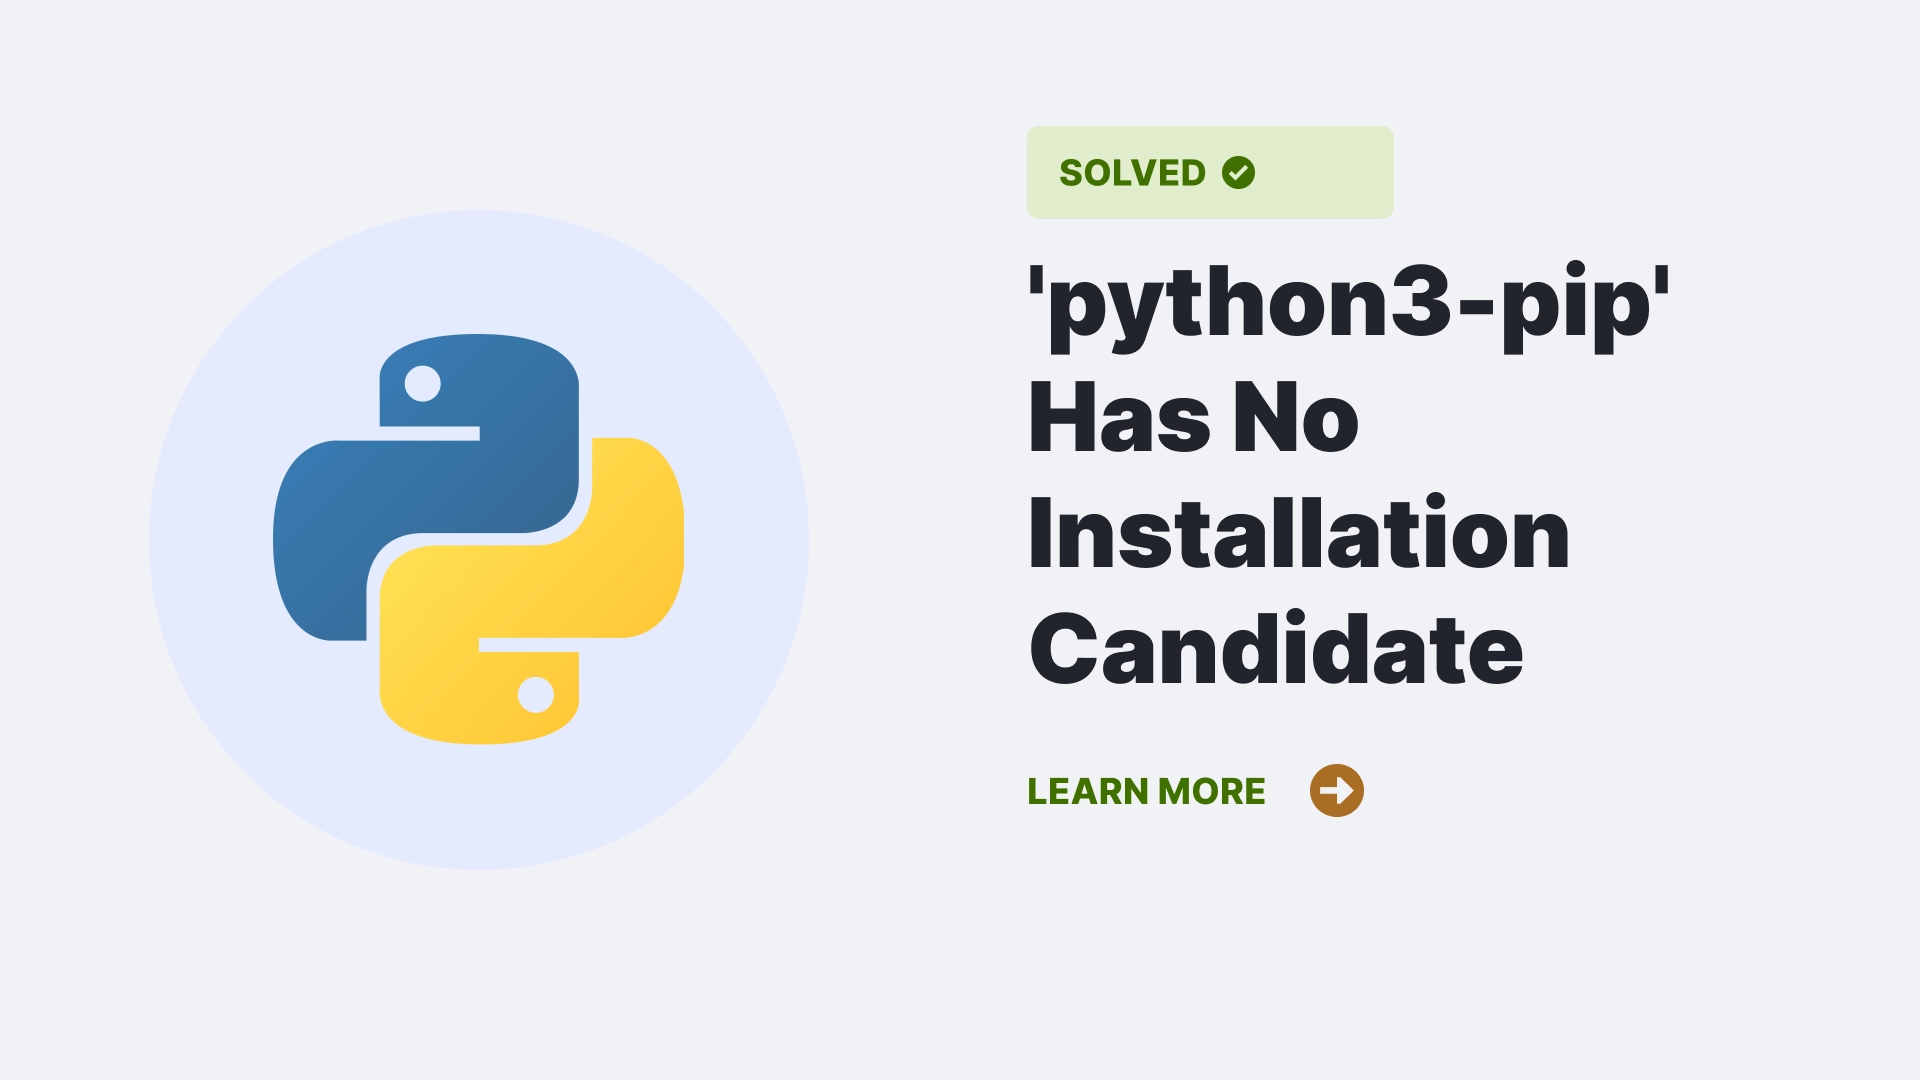 Package 'python3-pip' Has No Installation Candidate